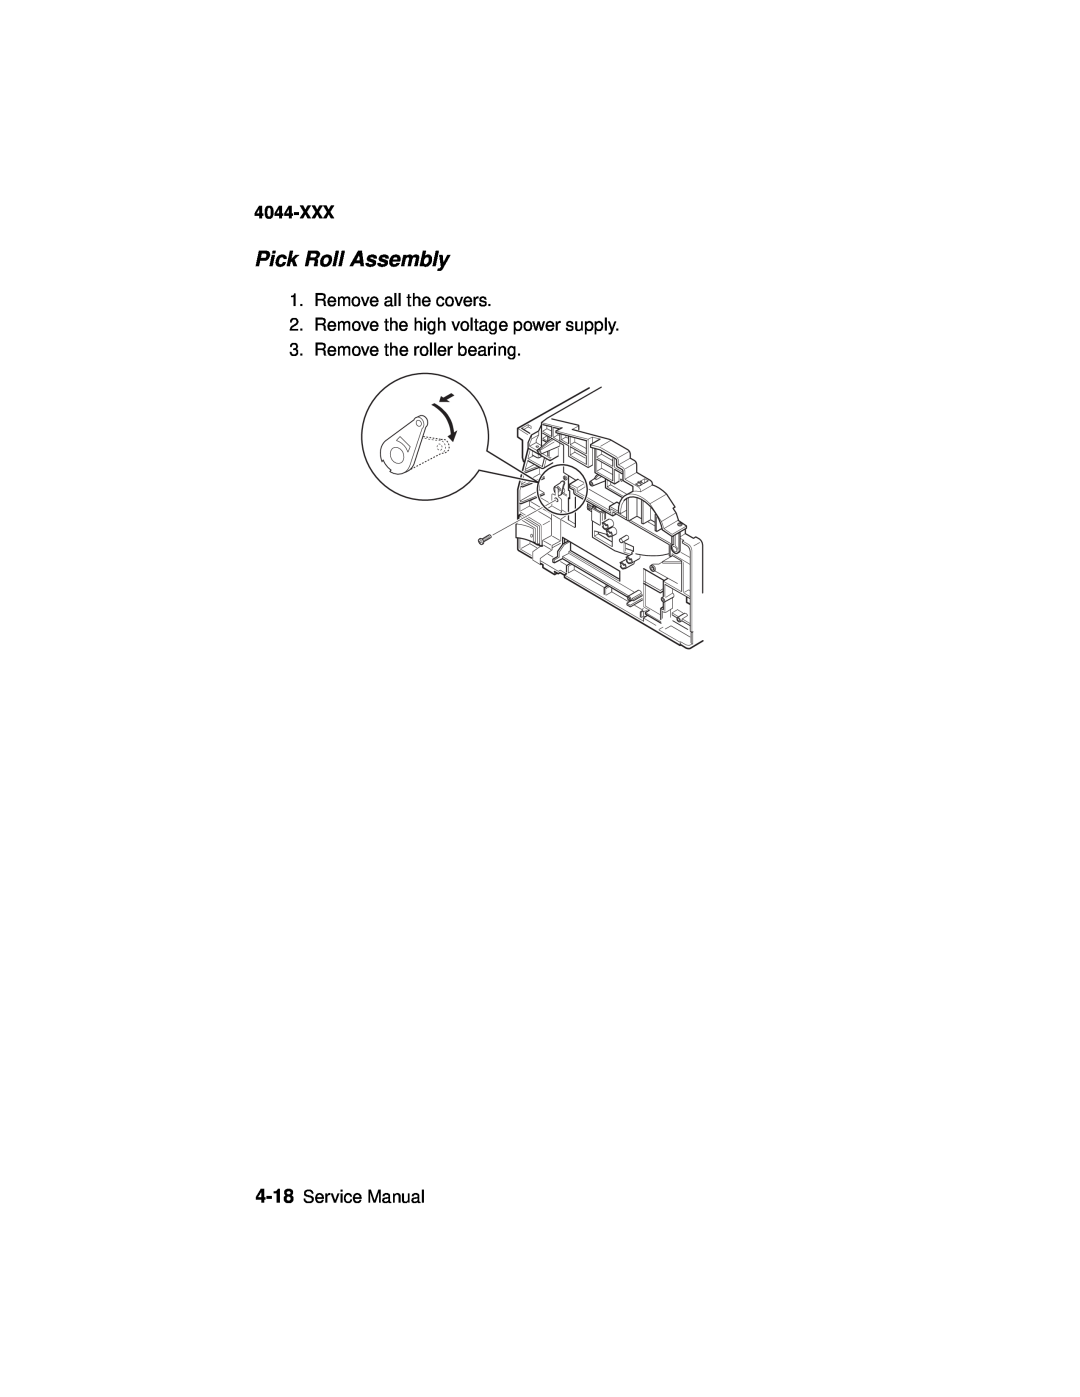 Lexmark 4044-XXX, E310 Pick Roll Assembly, Remove all the covers, Remove the high voltage power supply, Service Manual 